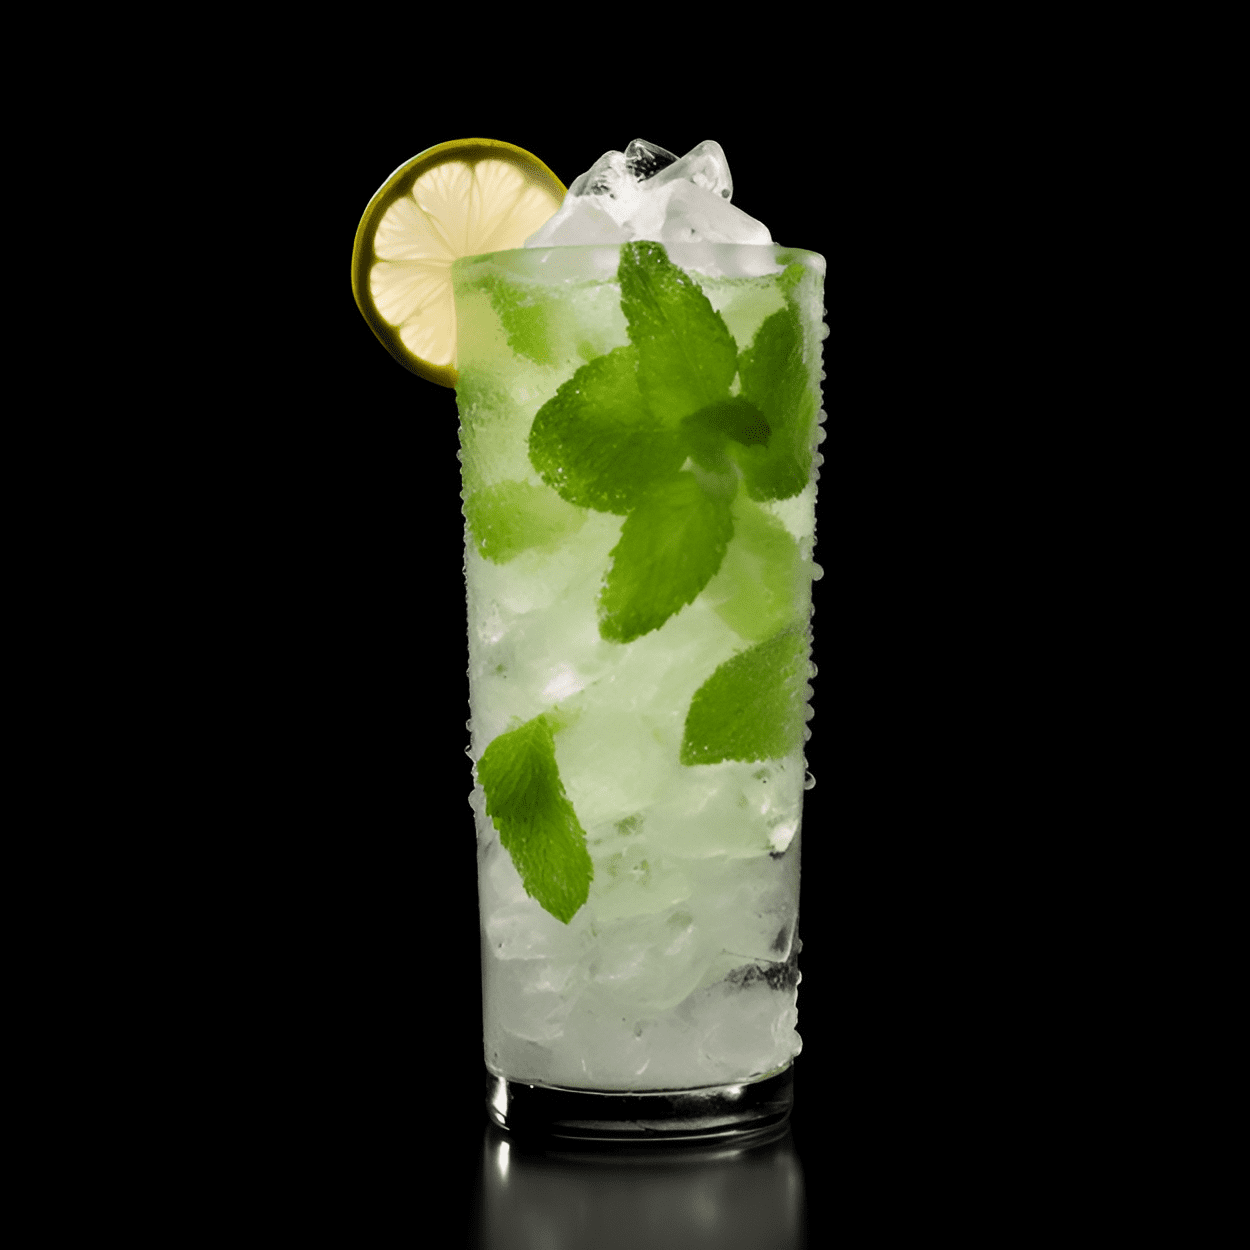 Ginger Mojito Cocktail Recipe - The Ginger Mojito is a refreshing, zesty, and slightly spicy cocktail. The sweetness of the sugar and the tartness of the lime balance the heat of the ginger, while the mint adds a fresh, cooling touch.